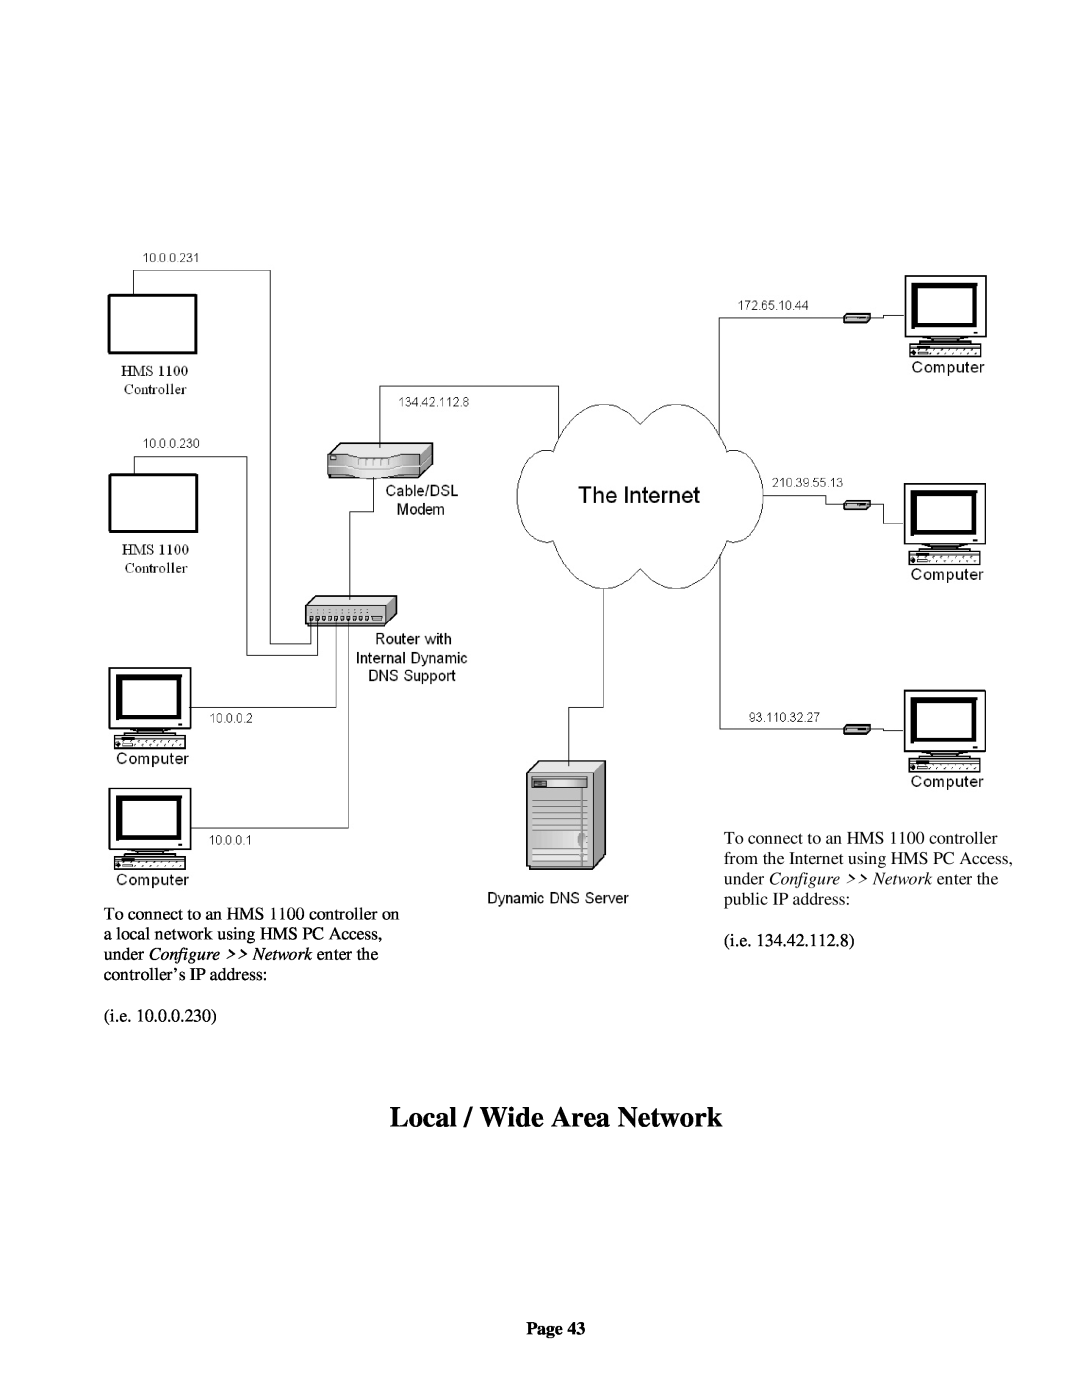 On-Q/Legrand HMS 1100 owner manual Local / Wide Area Network, i.e, Page 